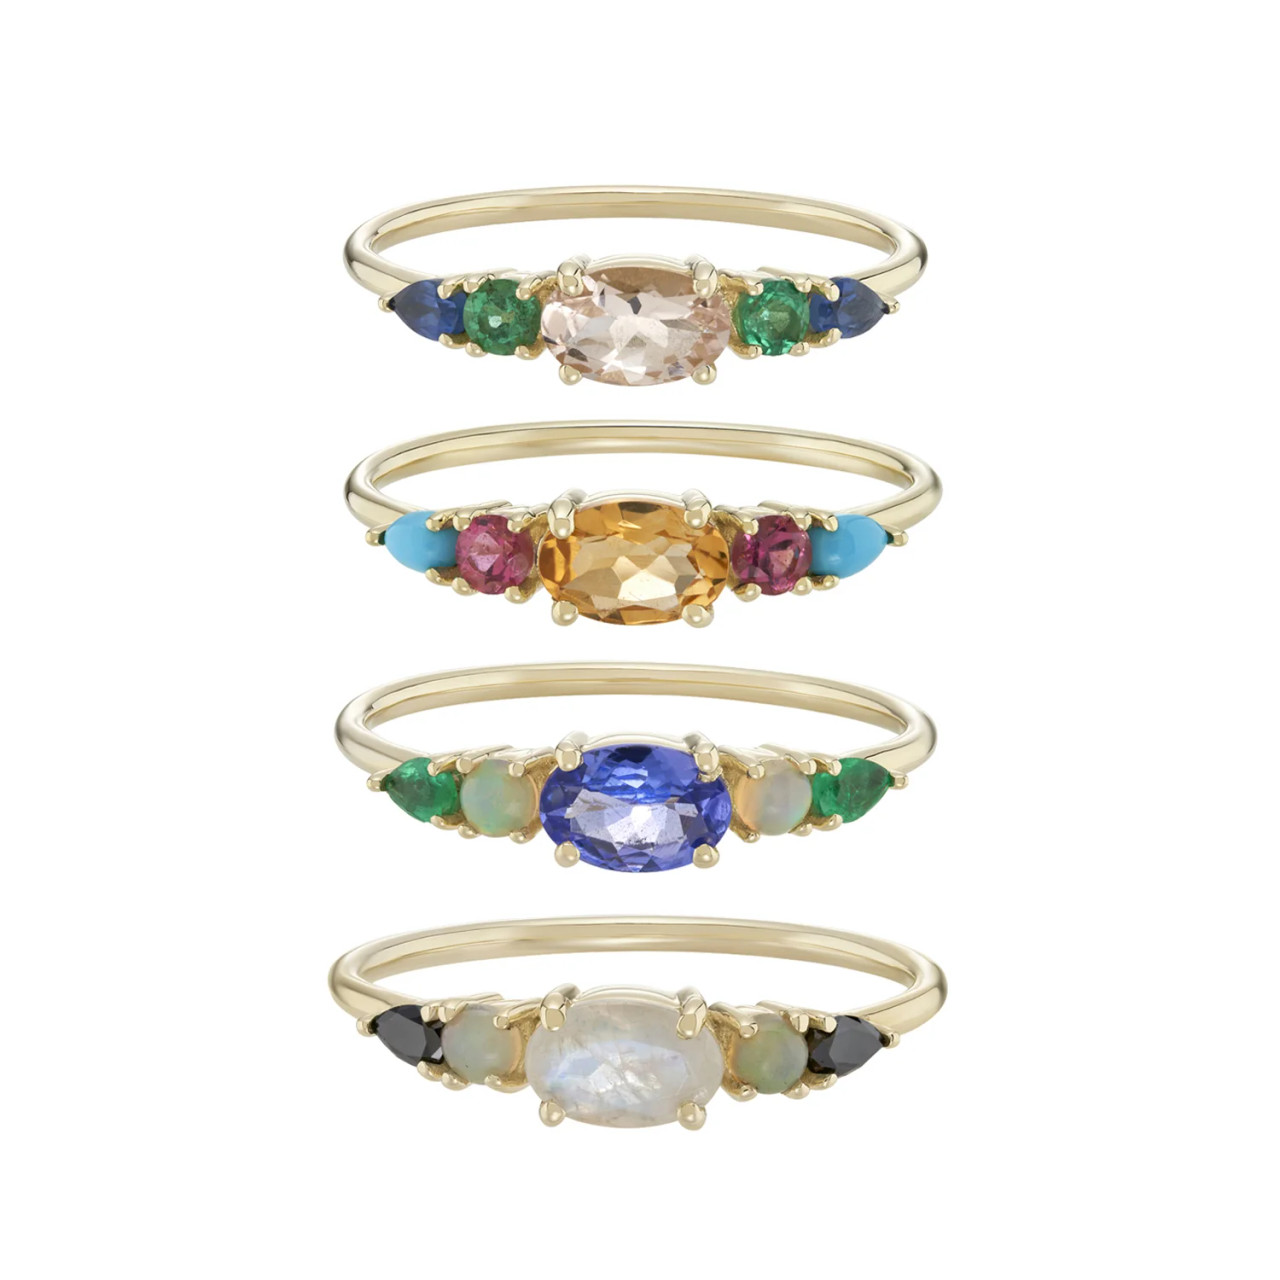 Multi Gemstone Claw Set Ring with Morganite, Emerald & Blue Sapphire, by metier by tomfoolery